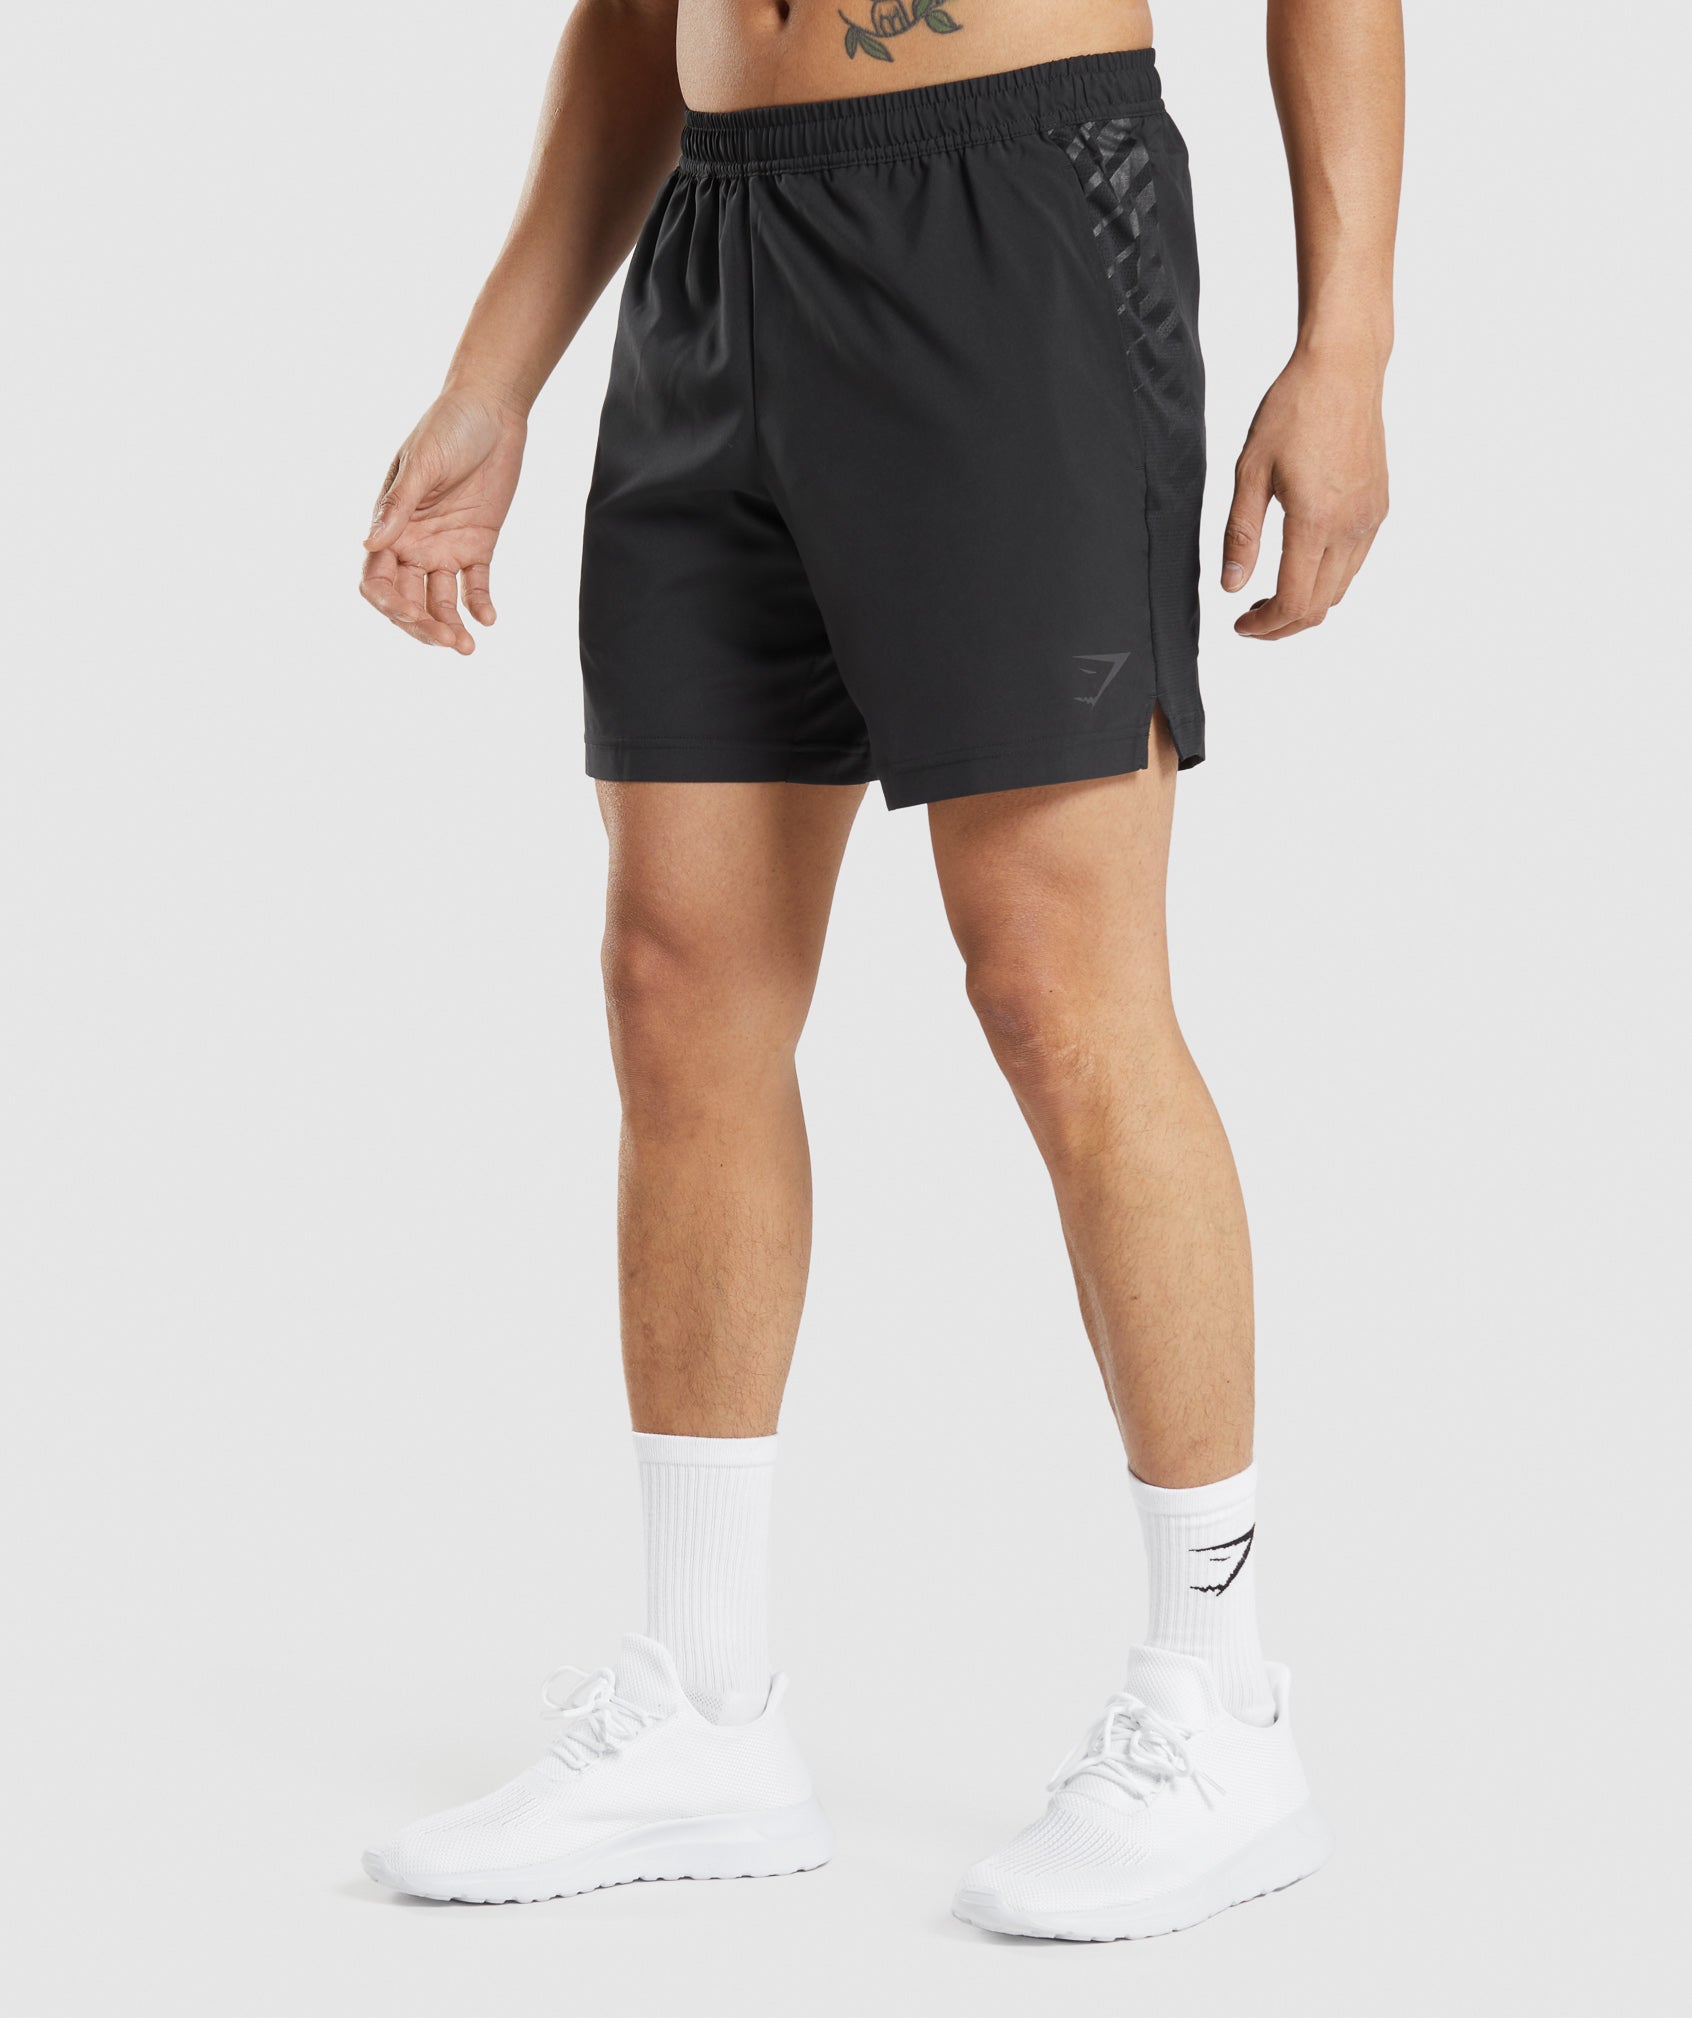 Sport Stripe 7" Short in Black is out of stock